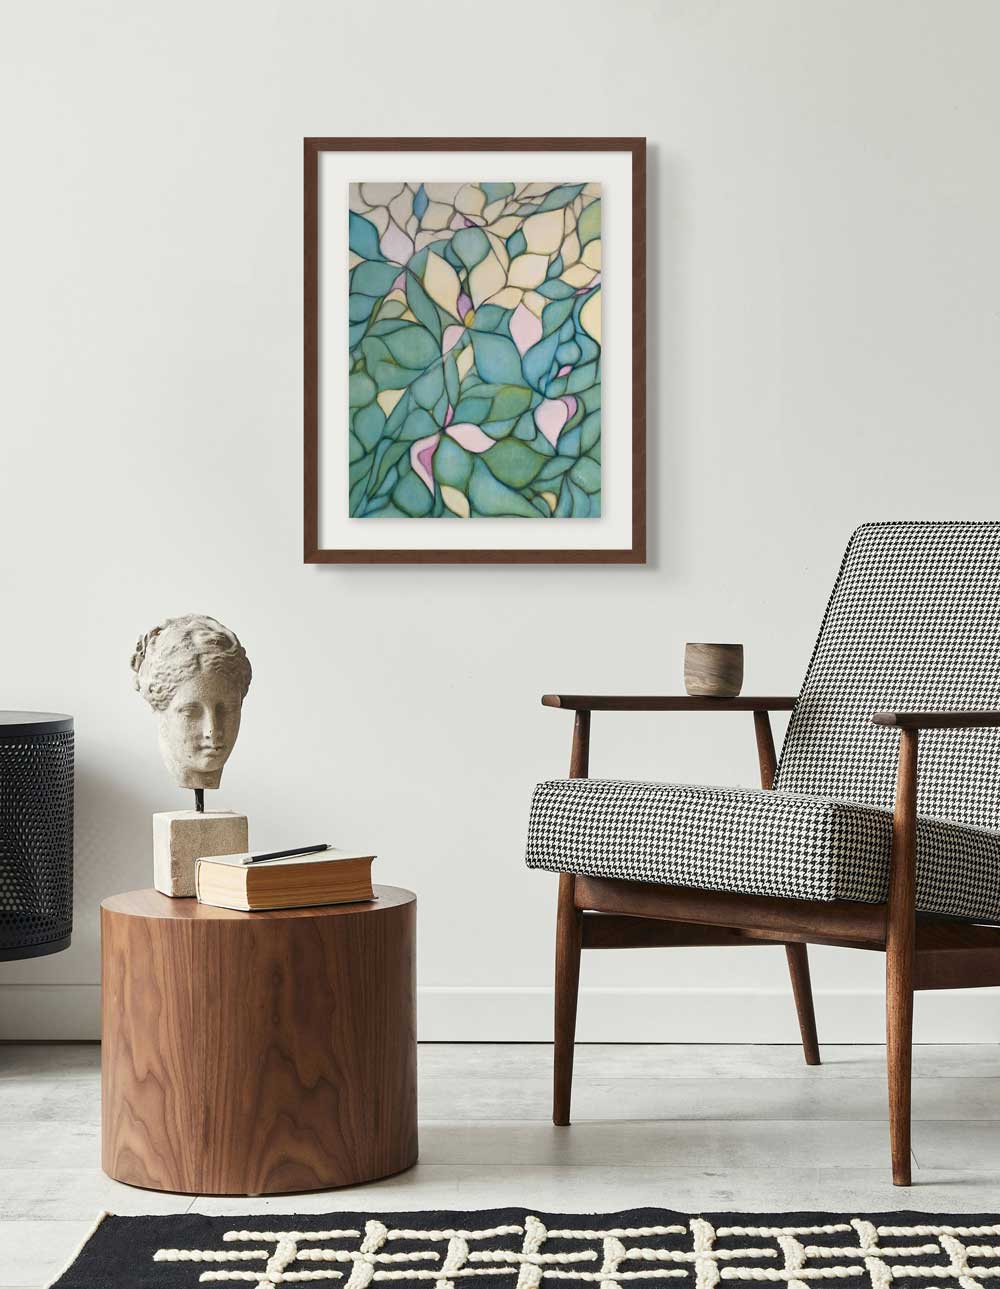 A botanically-inspired abstract of turquoise and yellow leaf-like shapes